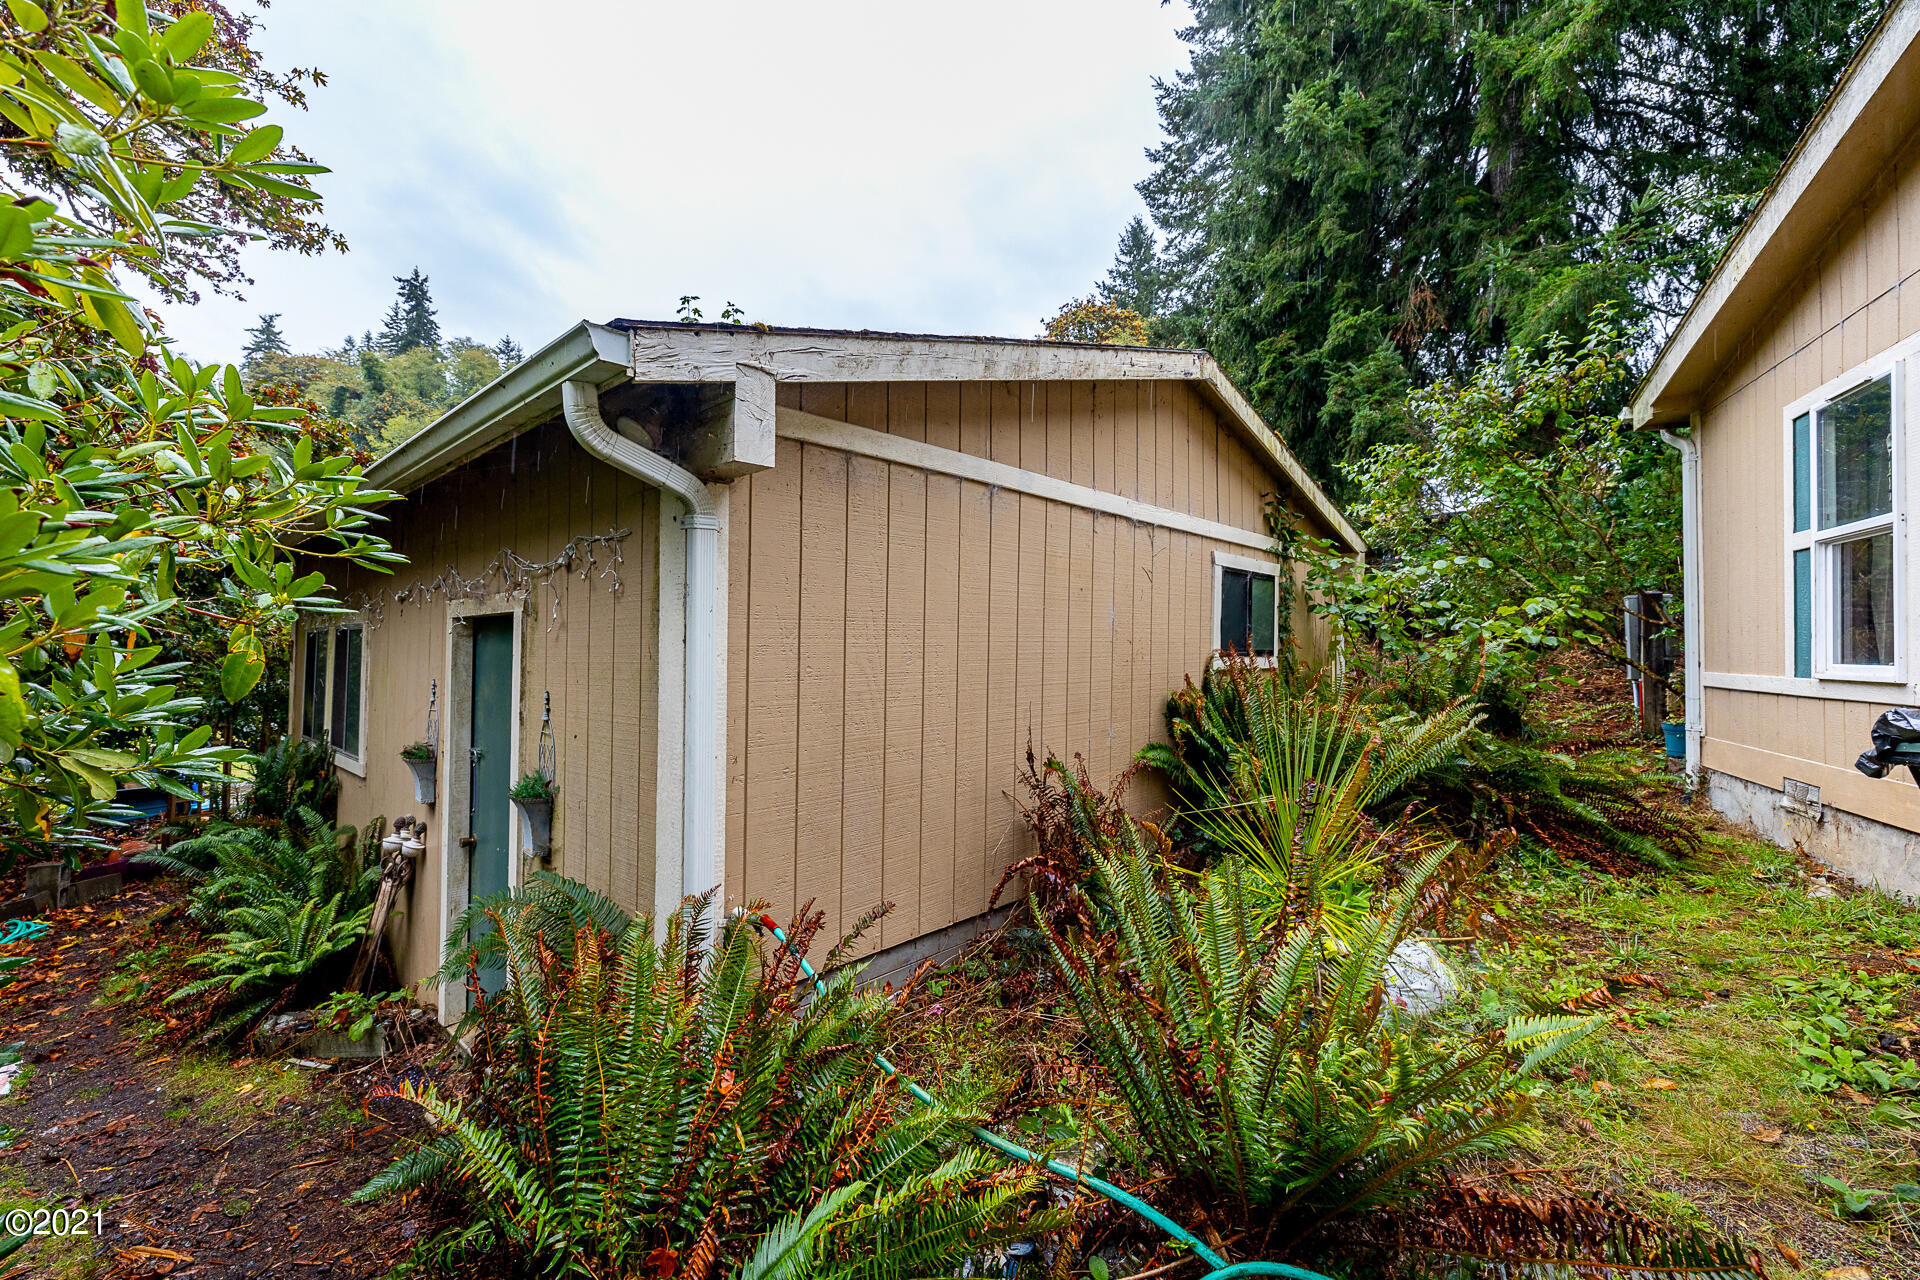 923 SE Loren Ln Depoe Bay, Gleneden Beach, Lincoln City, Newport, Otis, Rose Lodge, Seal Rock, Waldport, Yachats, To Home Listings - Amy Plechaty, Emerald Coast Realty Real Estate, homes for sale, property for sale